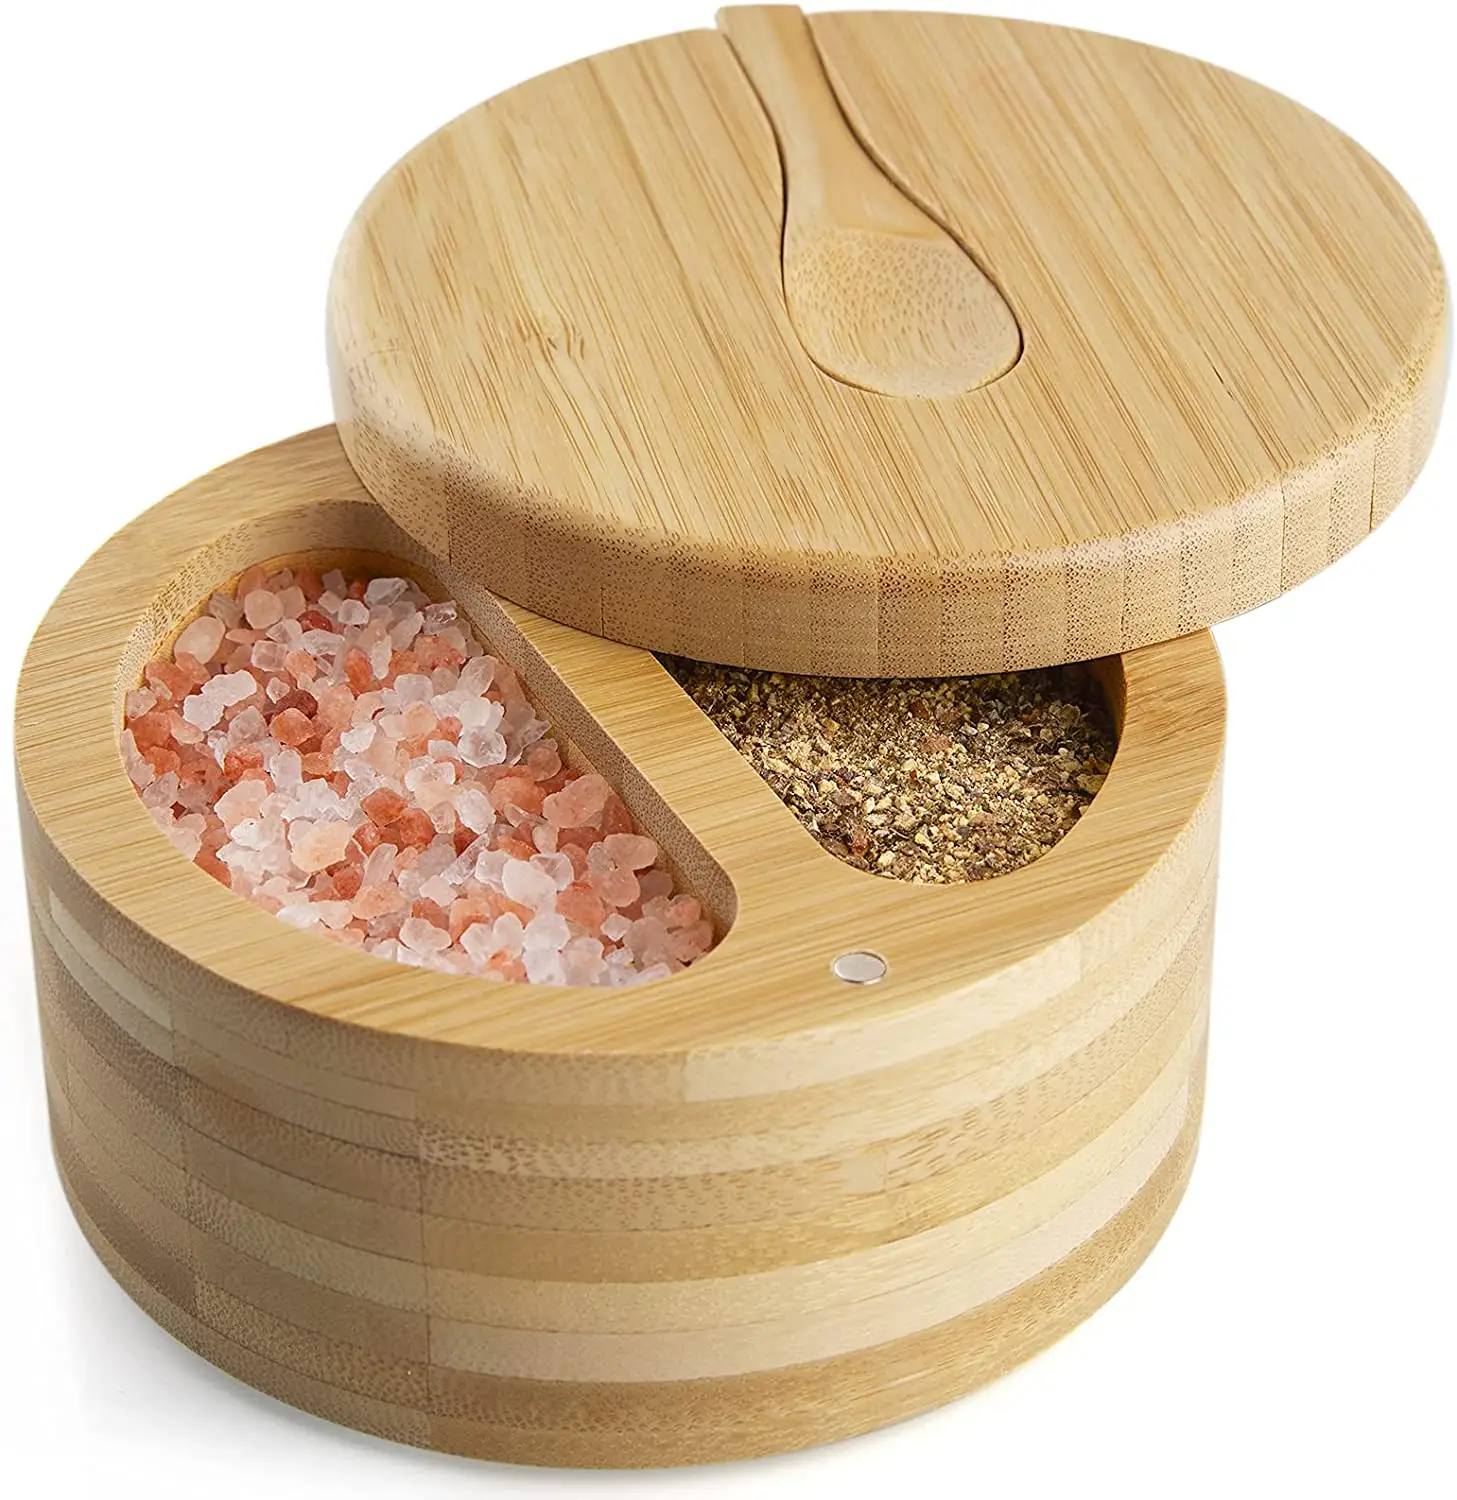 Bamboo Salt and Pepper Box Built-in Serving Spoon to Prevent Lost For Spice